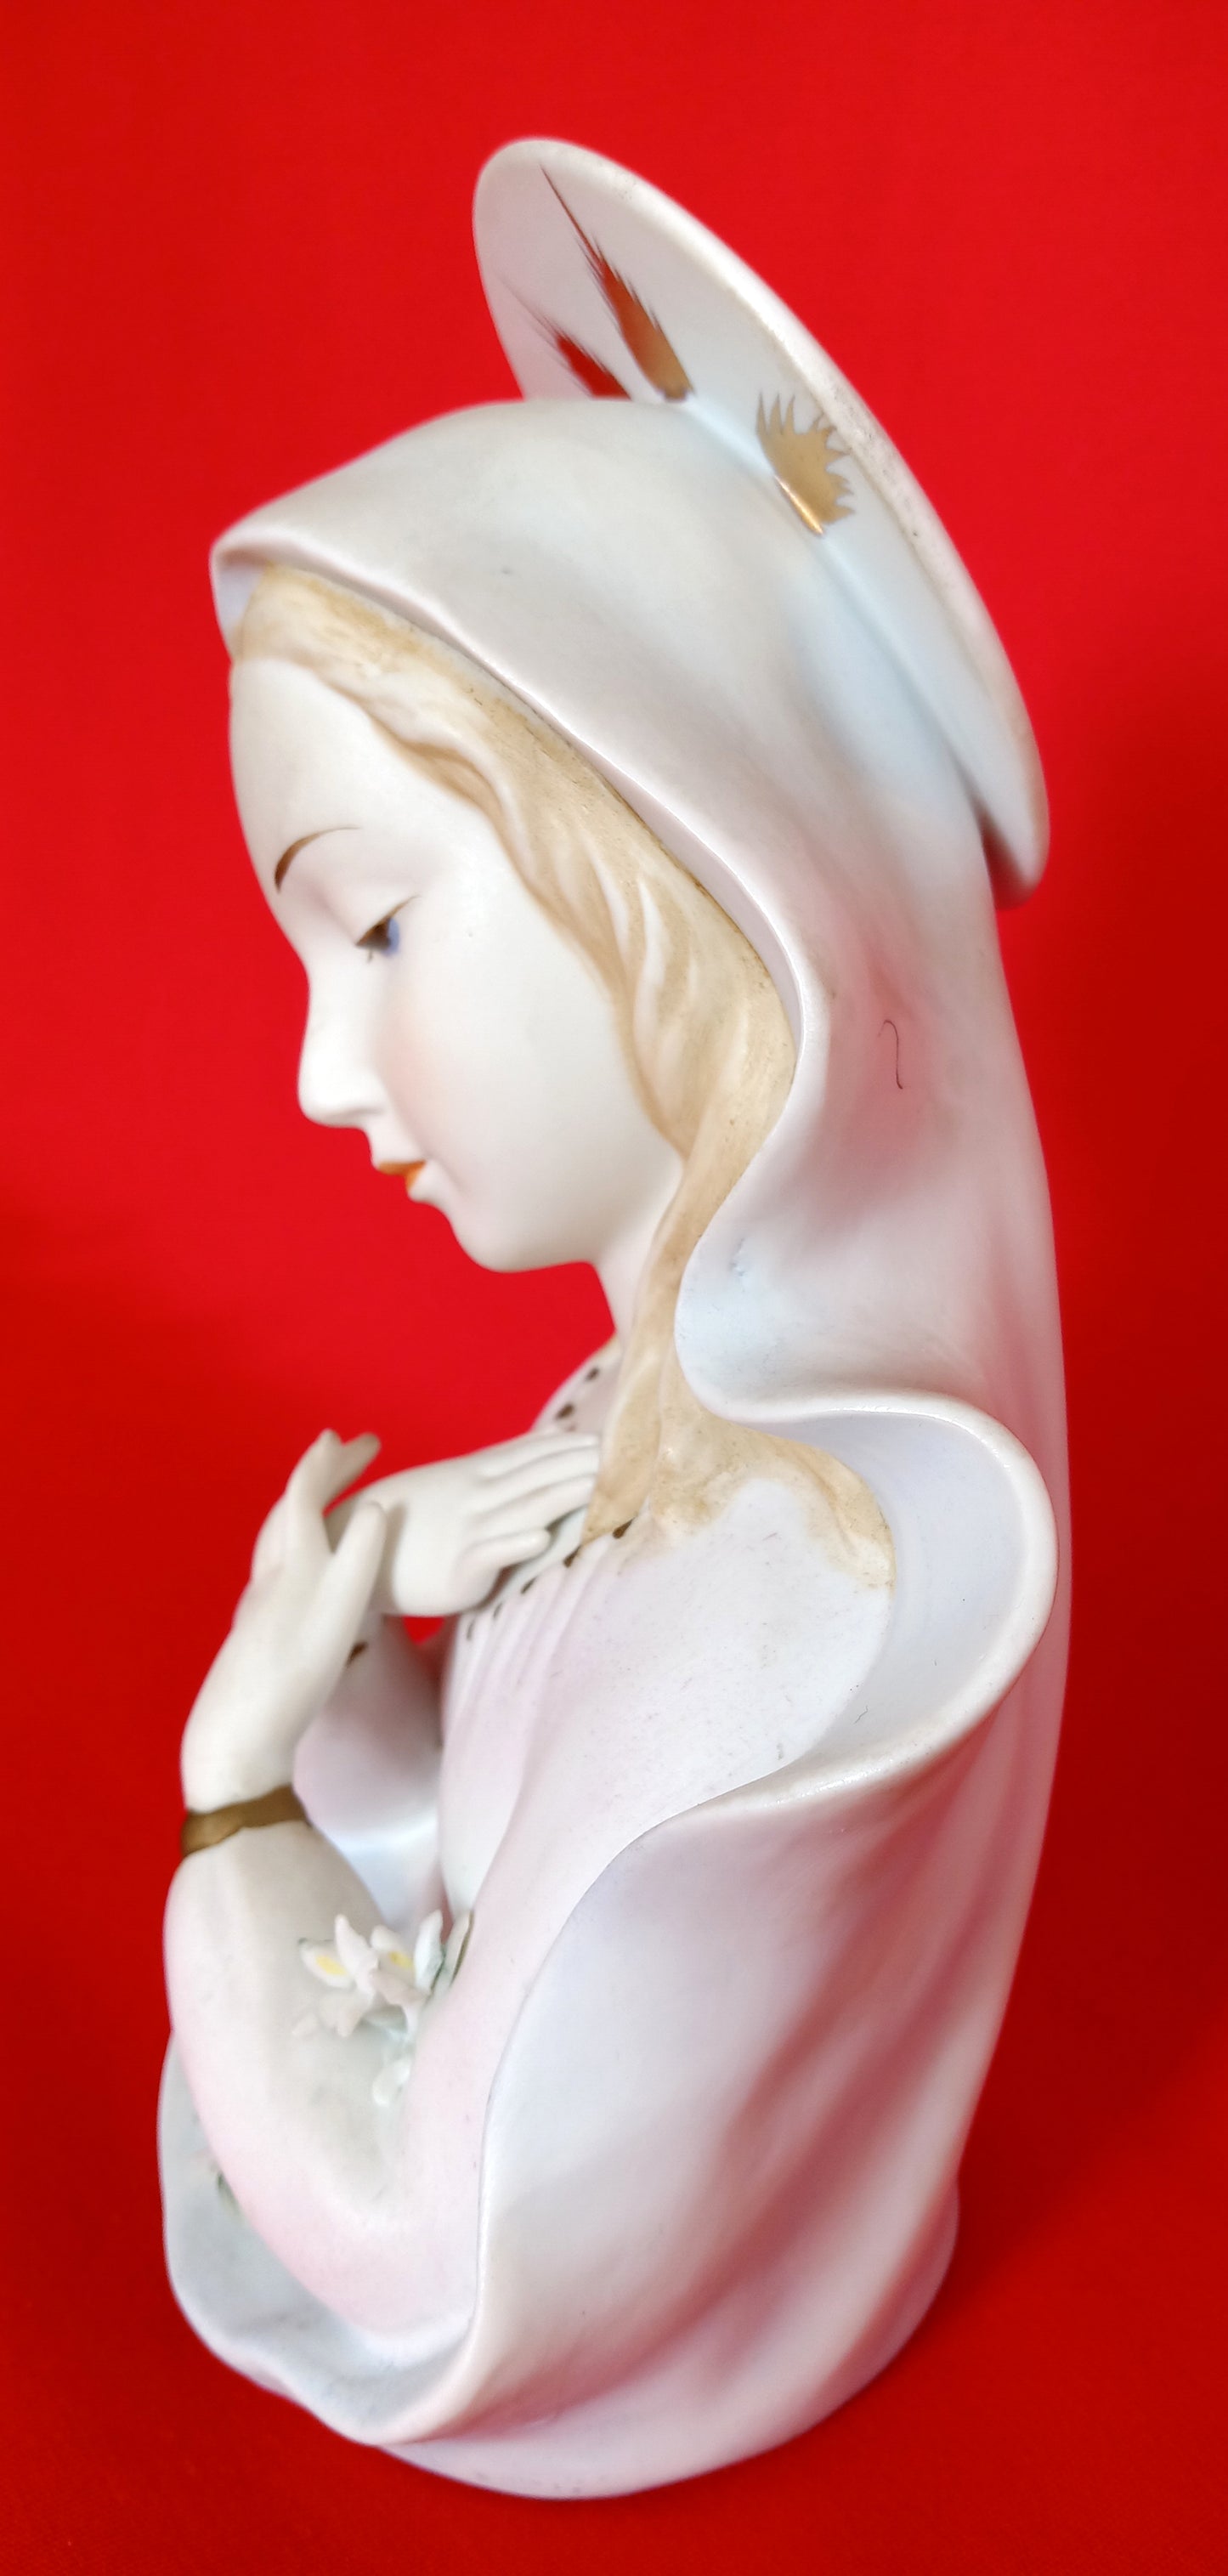 Lefton China Mary Madonna Bust Figurine Hand Painted Gilded Pastels Bisque Porcelain Statuette Catholic Religious Décor 7 1/2"H-Japan